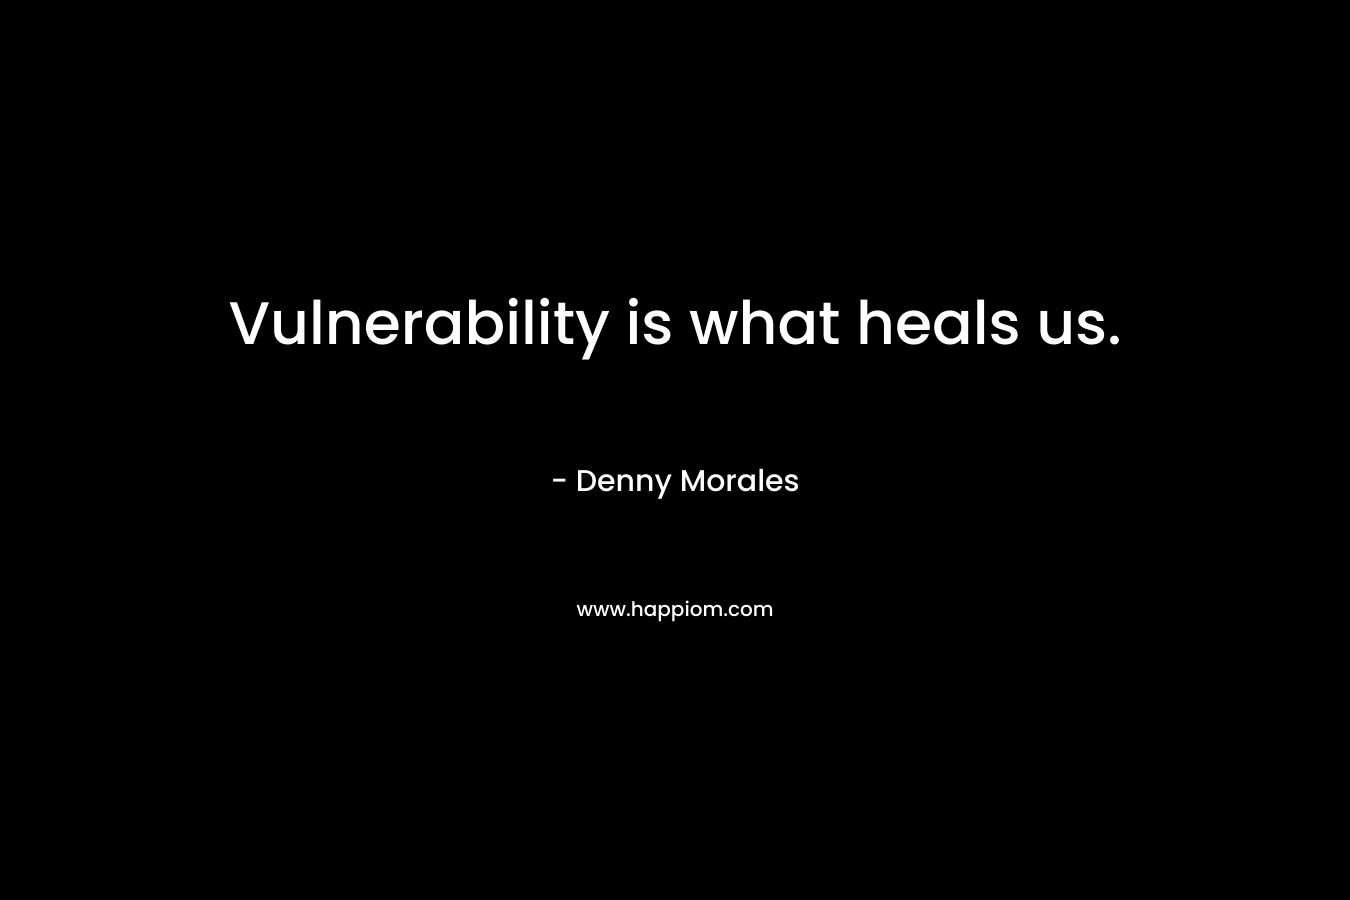 Vulnerability is what heals us.